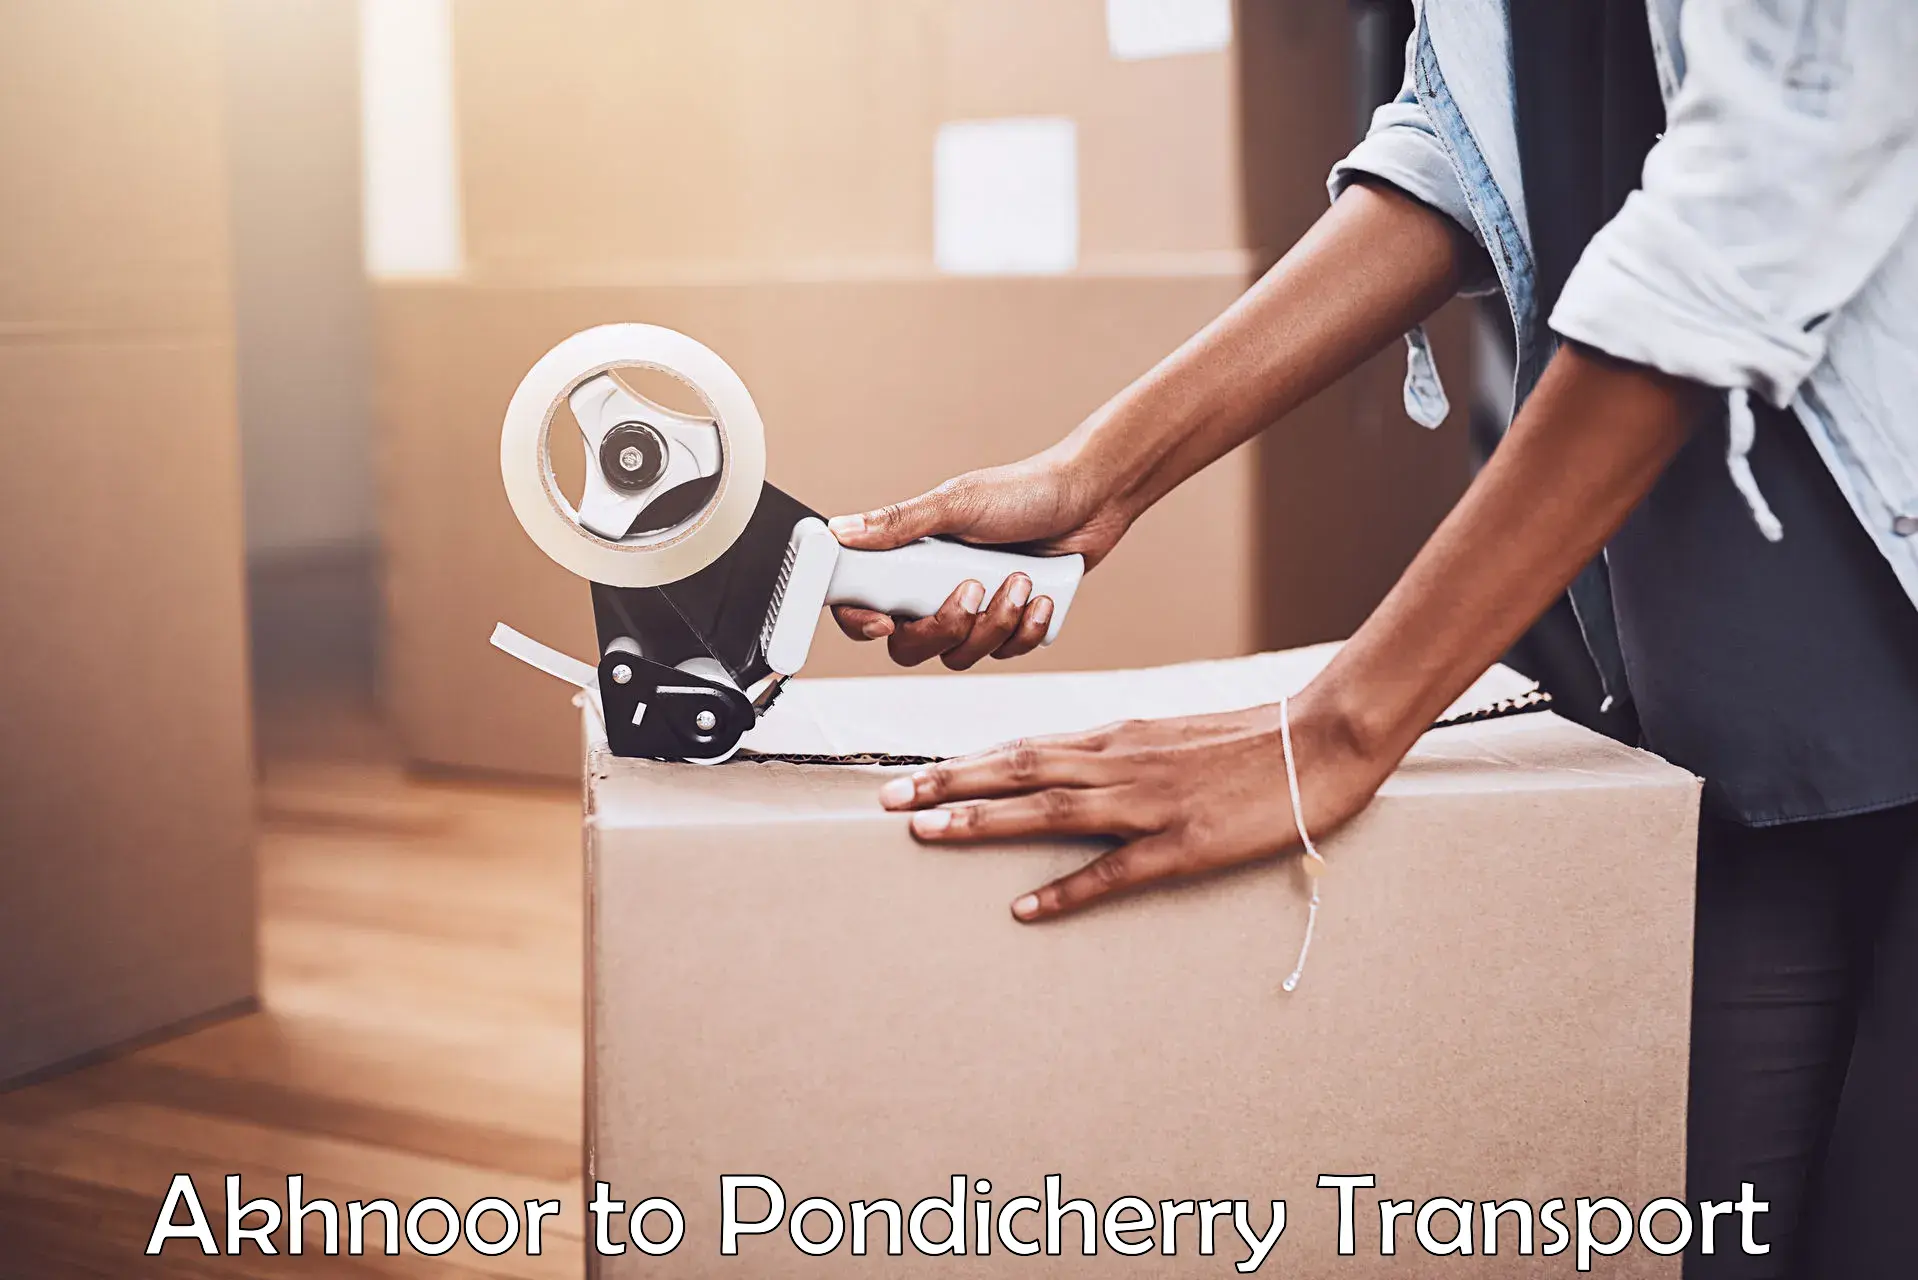 Daily parcel service transport Akhnoor to Pondicherry